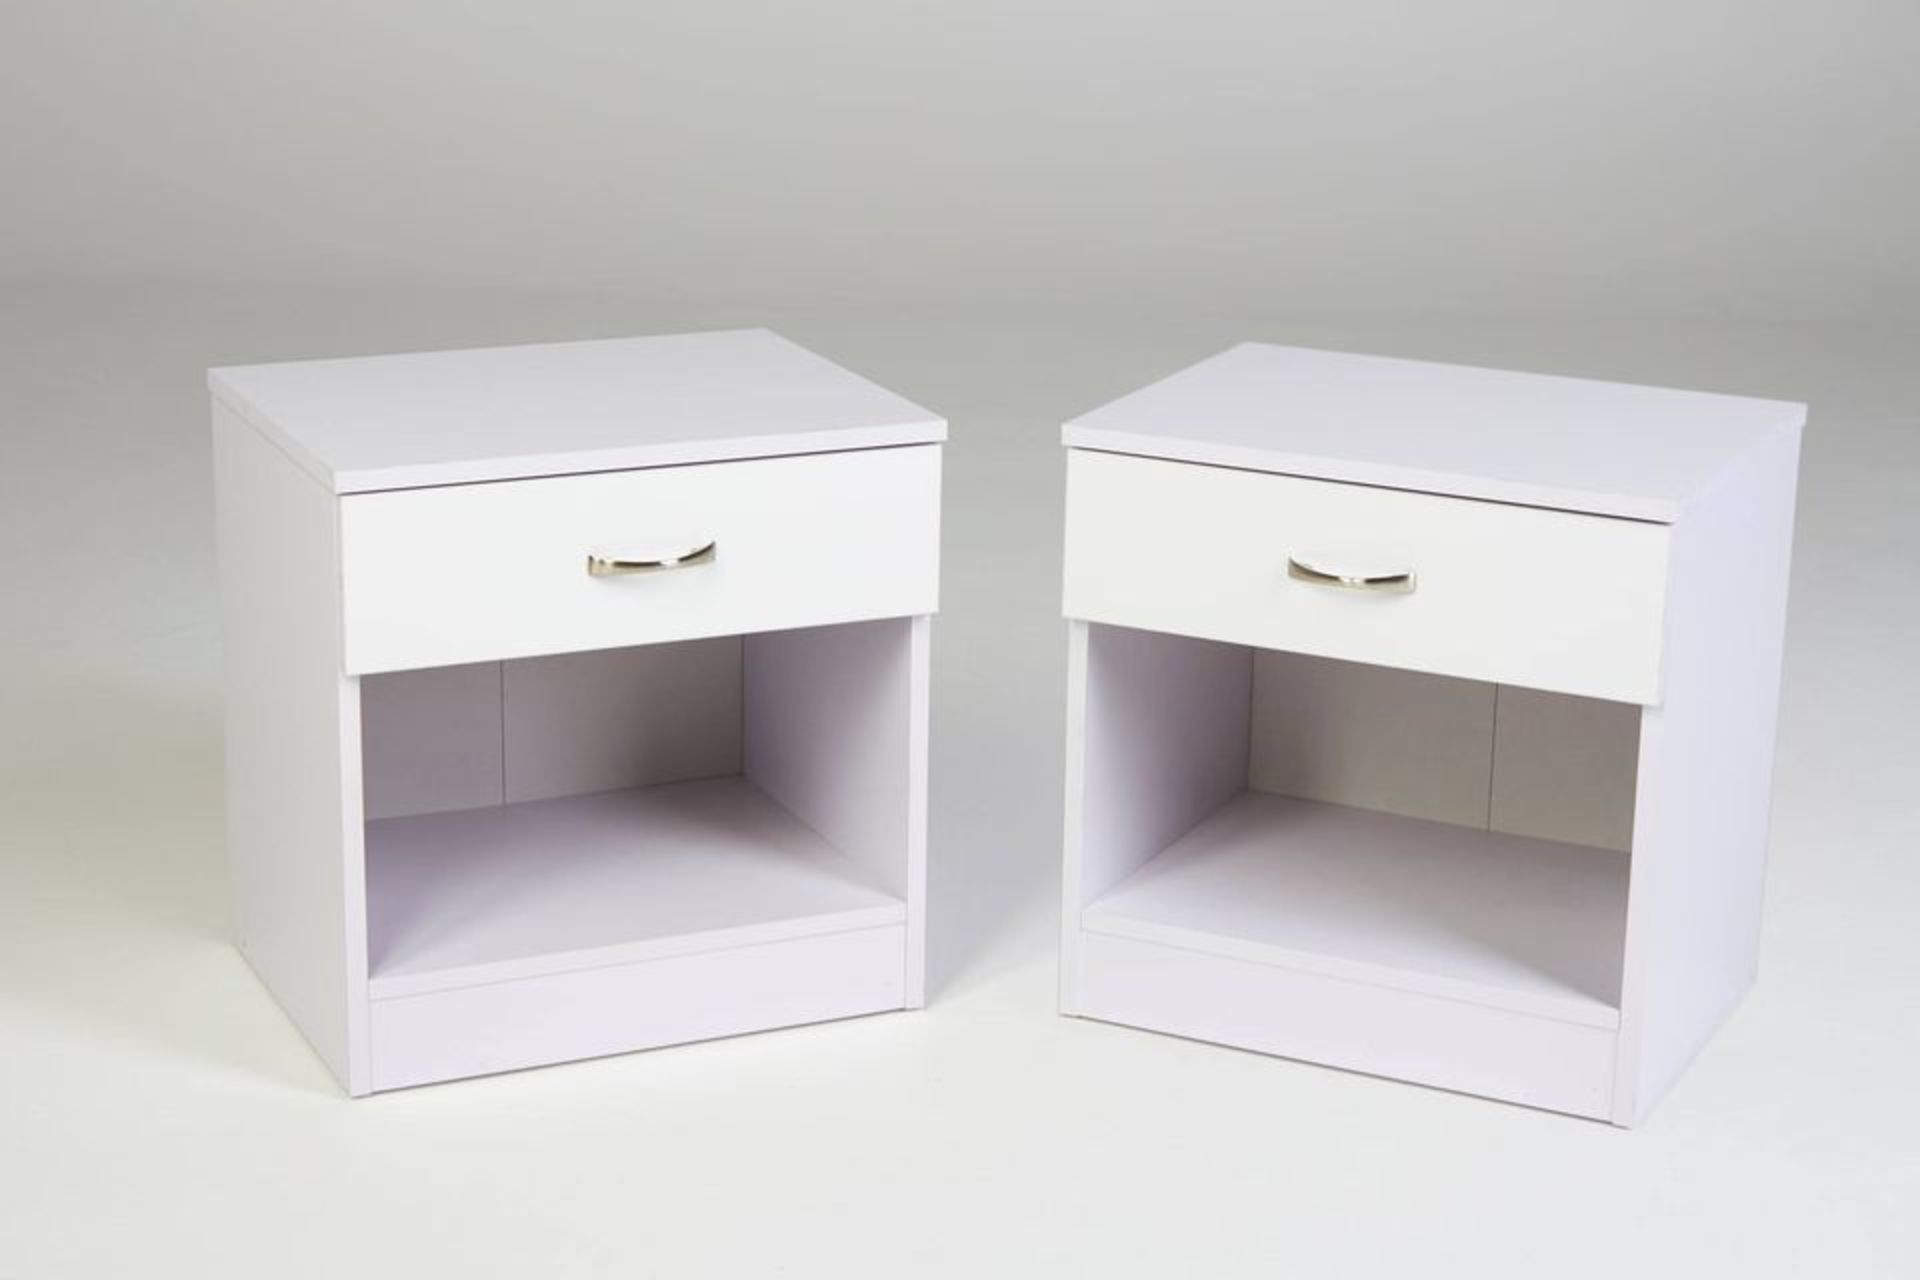 PAIR OF WHITE SINGLE DRAWER BEDSIDES WITH HIGH GLOSS DRAWER FRONTS - Image 2 of 4